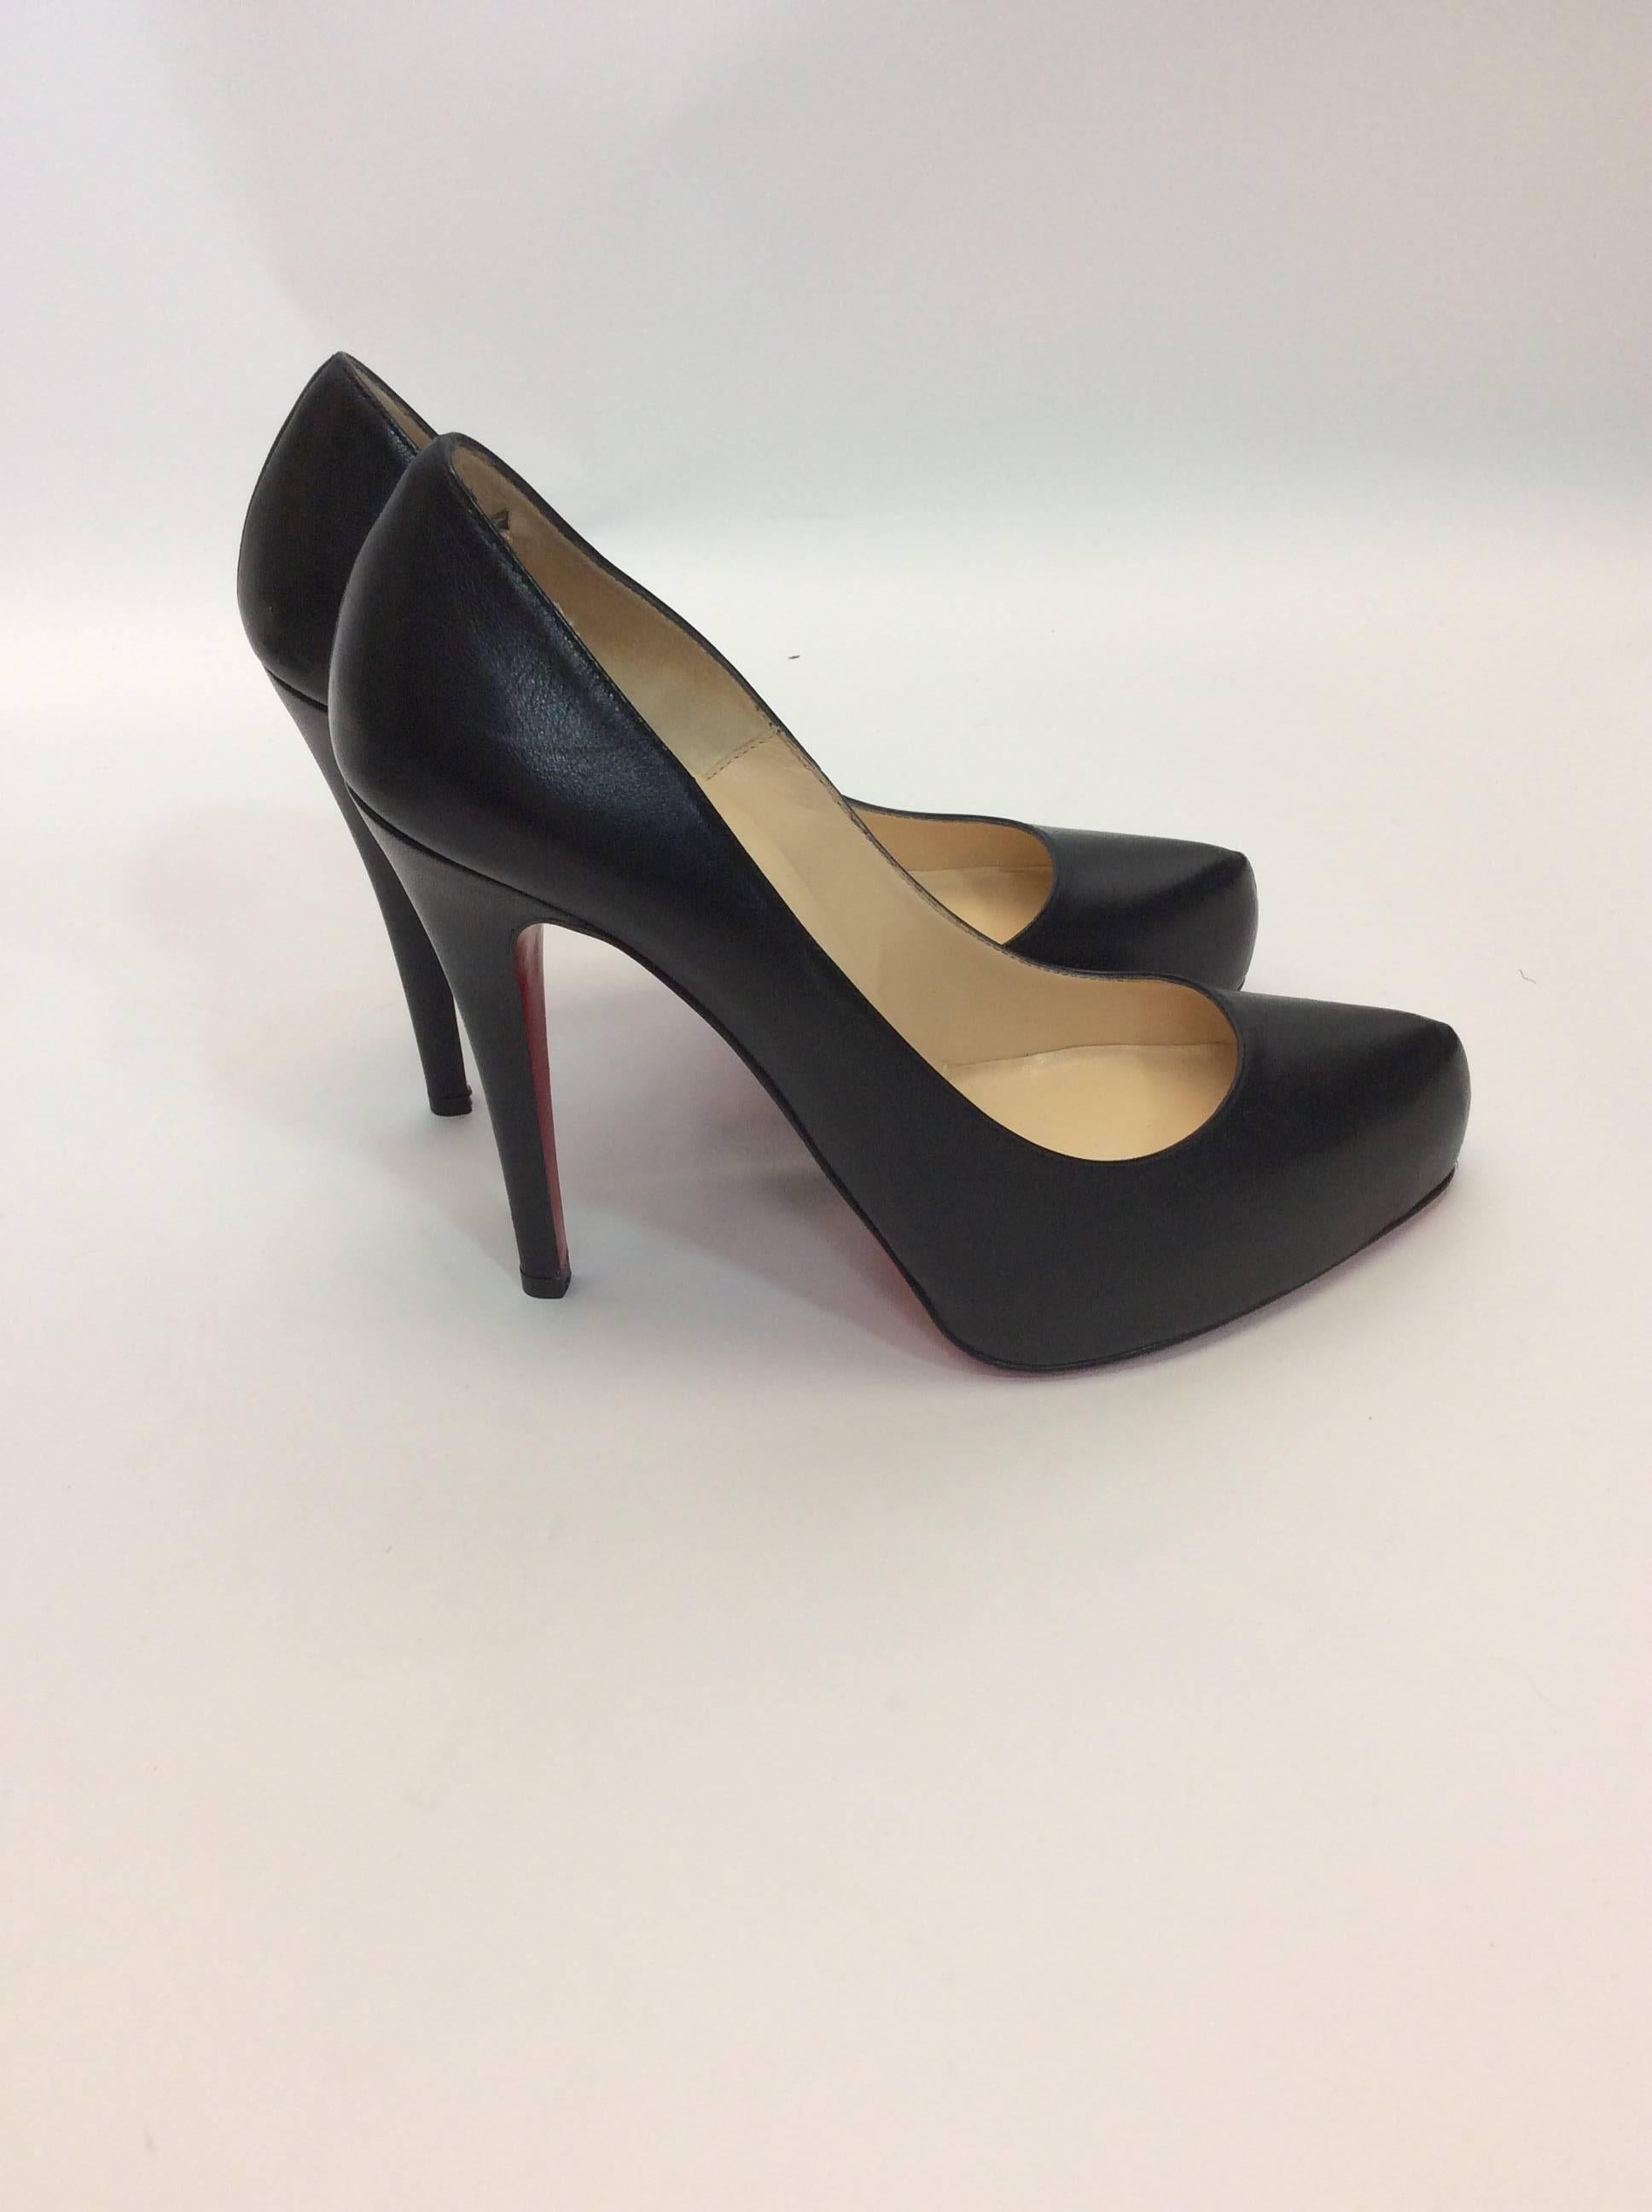 Christian Louboutin Black Leather Pumps In Excellent Condition For Sale In Narberth, PA